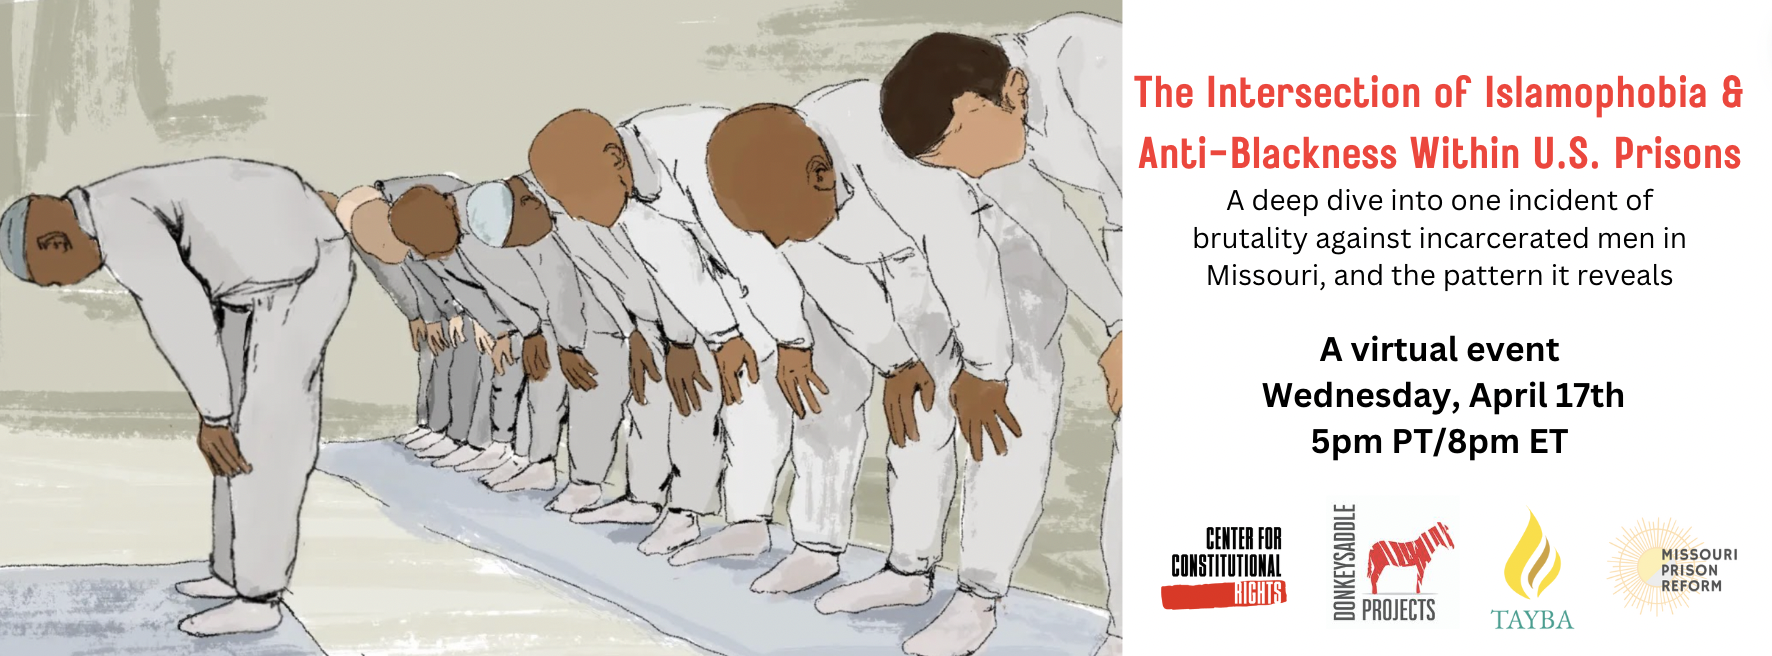 A drawing of men with different skin tones in gray sweatsuits praying. The Intersection of Islamophobia & Anti-Blackness Within U.S. Prisons: A deep dive into one incident of brutality against incarcerated men in Missouri, and the pattern it reveals. A virtual event Wednesday, April 17, 5pm PT/8pm ET. Logos of Center for Constitutional Rights, Donkeysaddle Projects, Tayba Foundation, and Council on American-Islamic Relations.